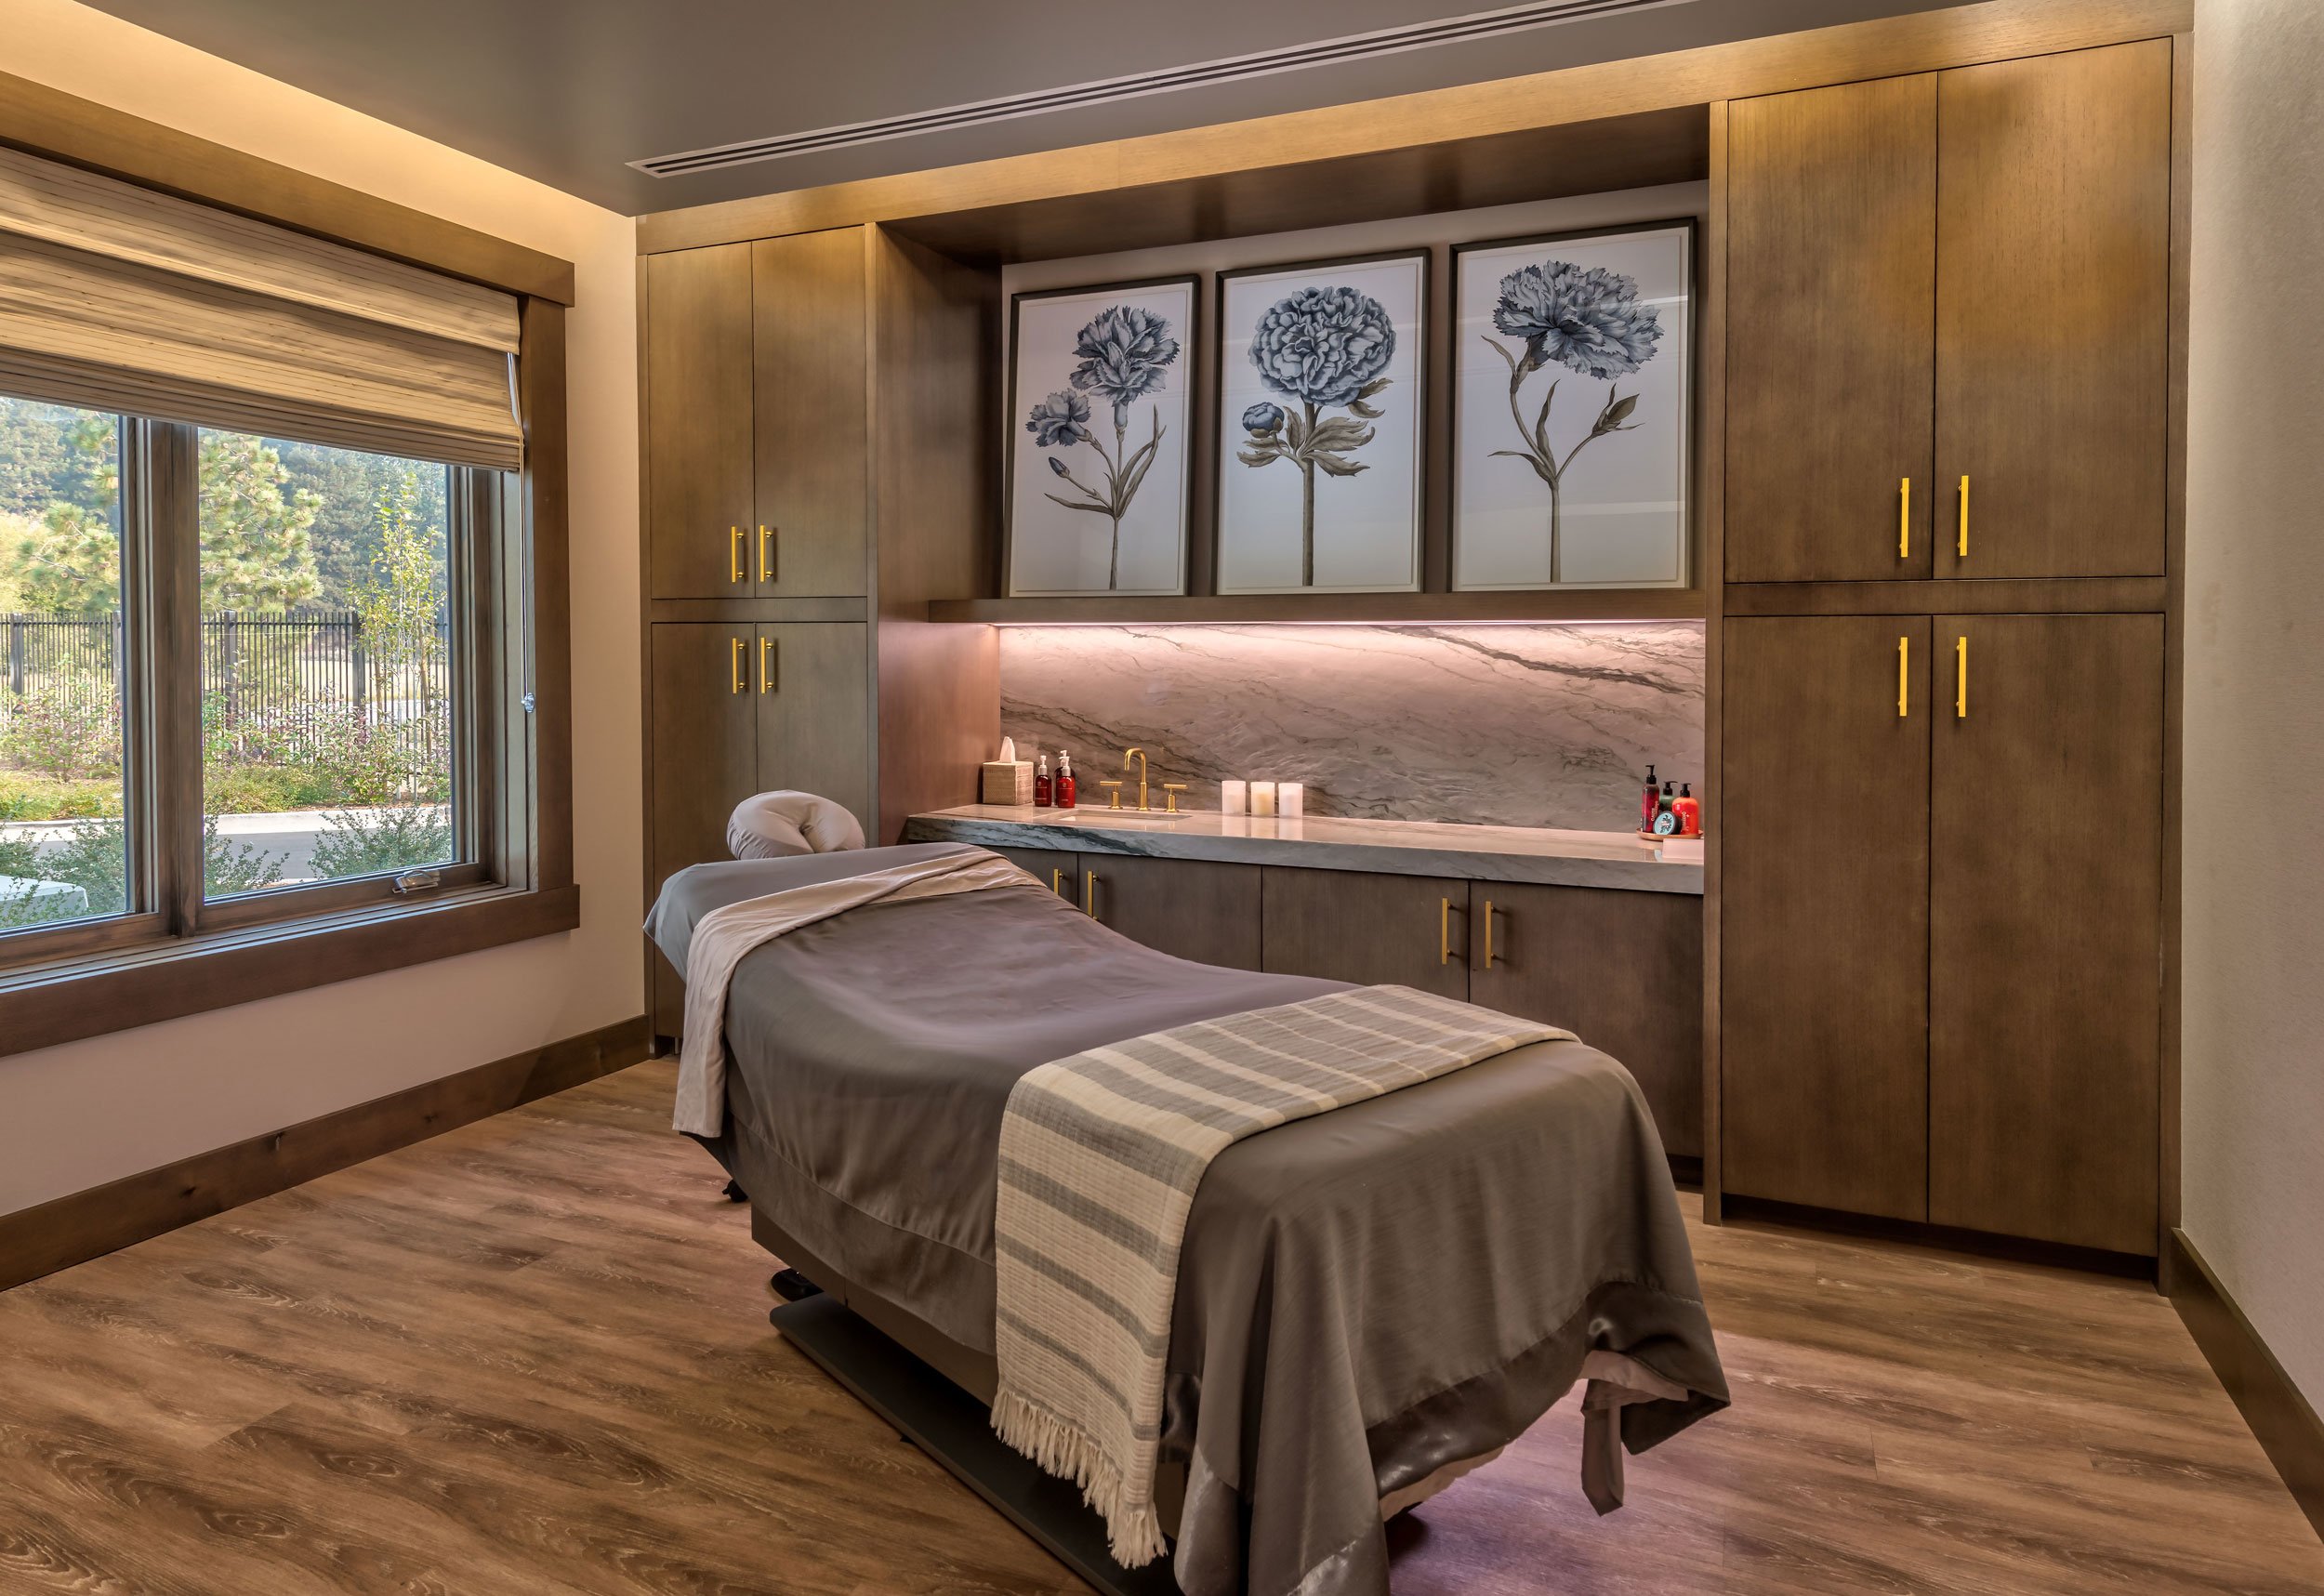 Tahoe Beach Club's spa features a tranquil massage room with a wooden floor and ample natural light from a large window. (Copy) (Copy) (Copy)